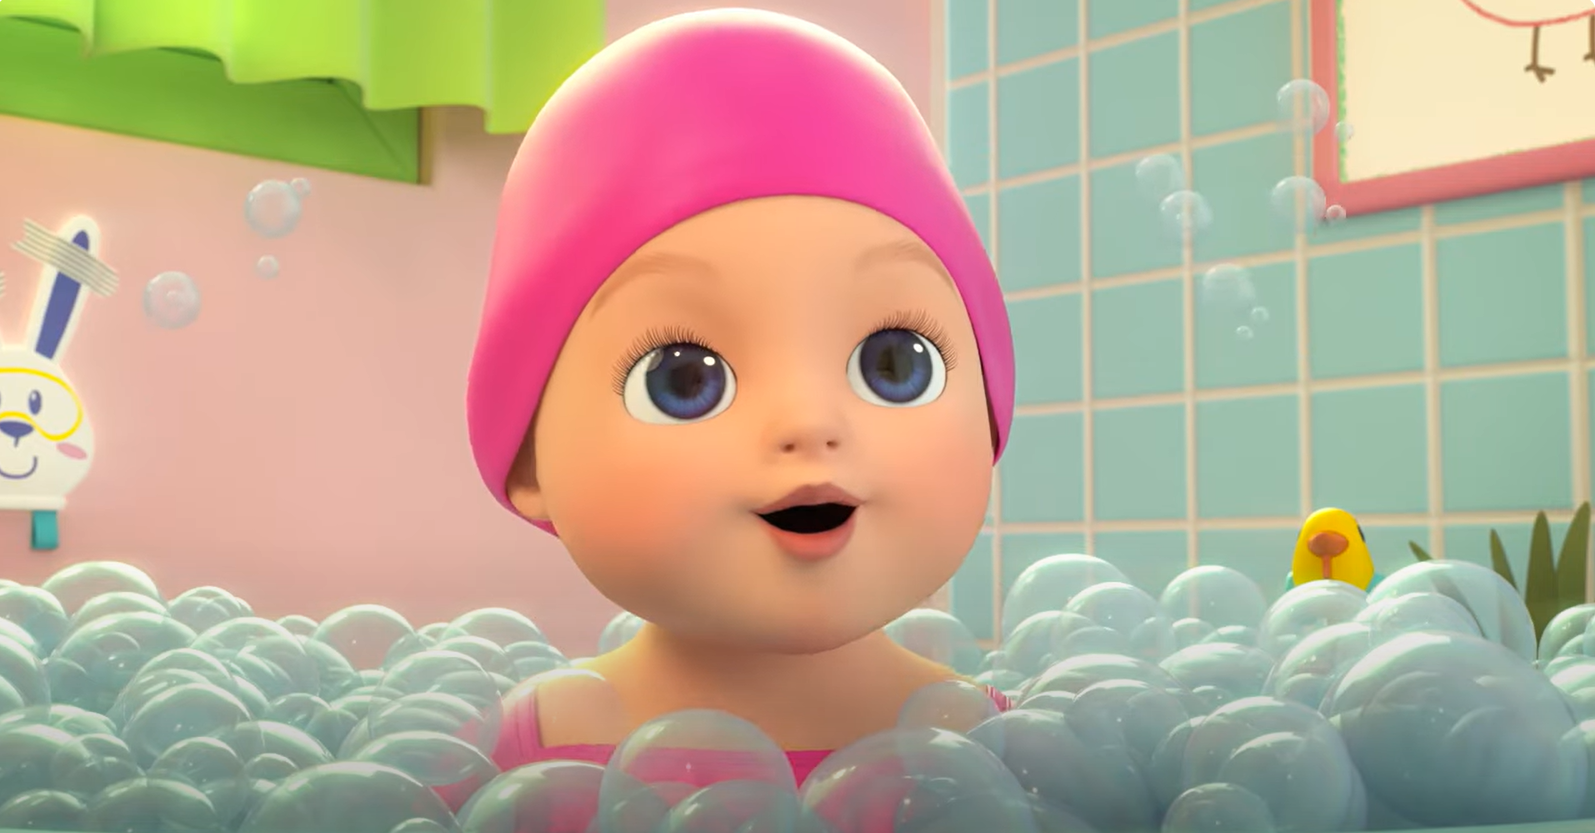 Bath Time! | BABY Born The Animated Series